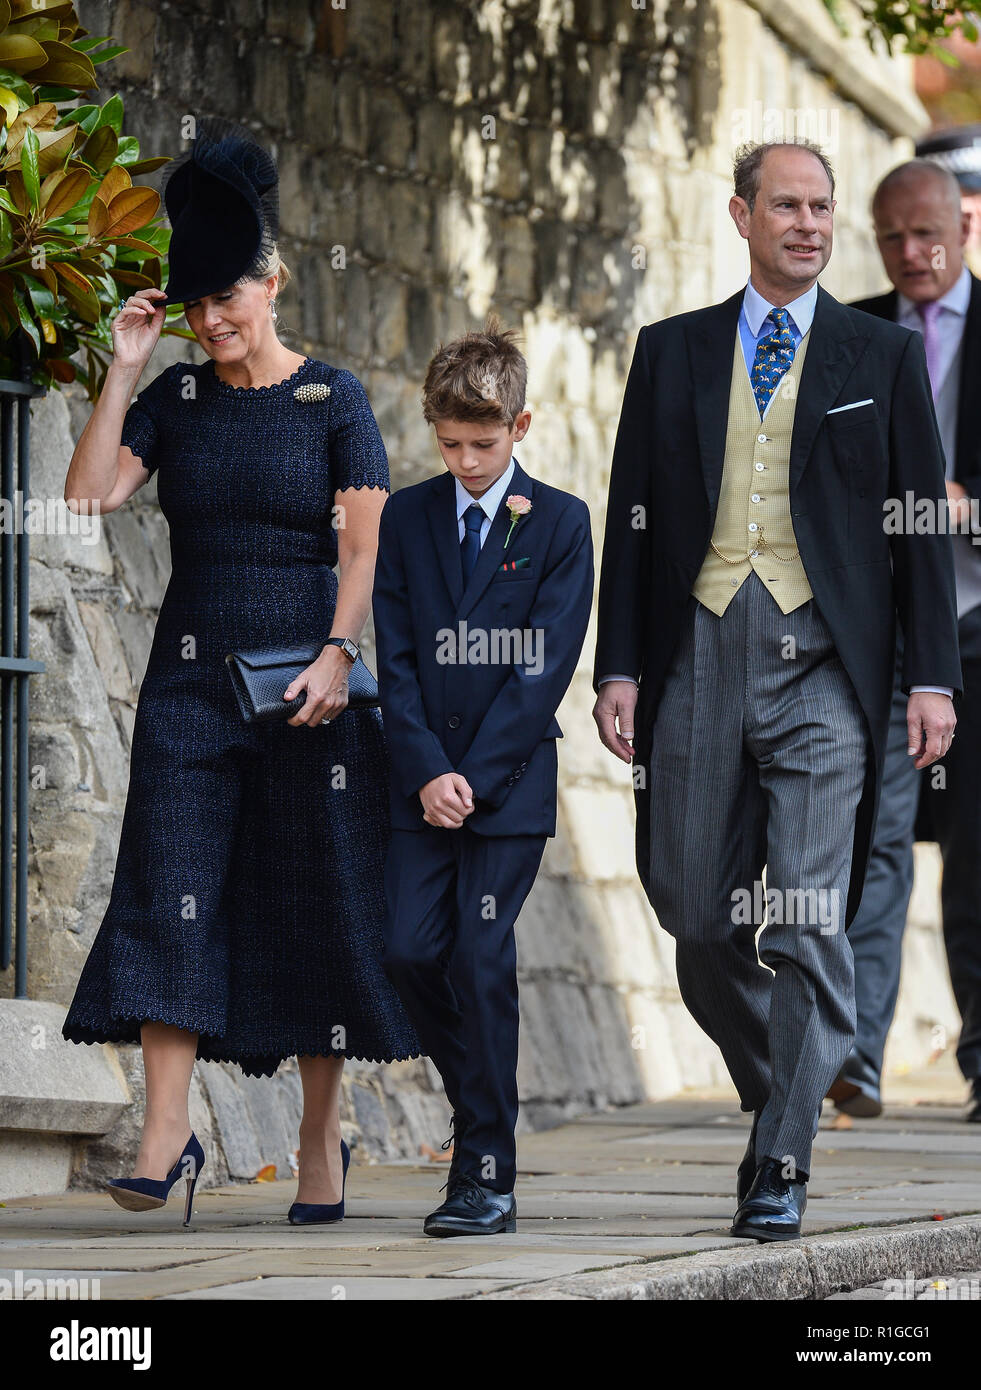 The wedding of Princess Eugenie of York and Jack Brooksbank in Windsor  Featuring: Sophie Countess of Wessex, James Viscount Severn, Prince Edward Where: Windsor, United Kingdom When: 12 Oct 2018 Credit: John Rainford/WENN Stock Photo